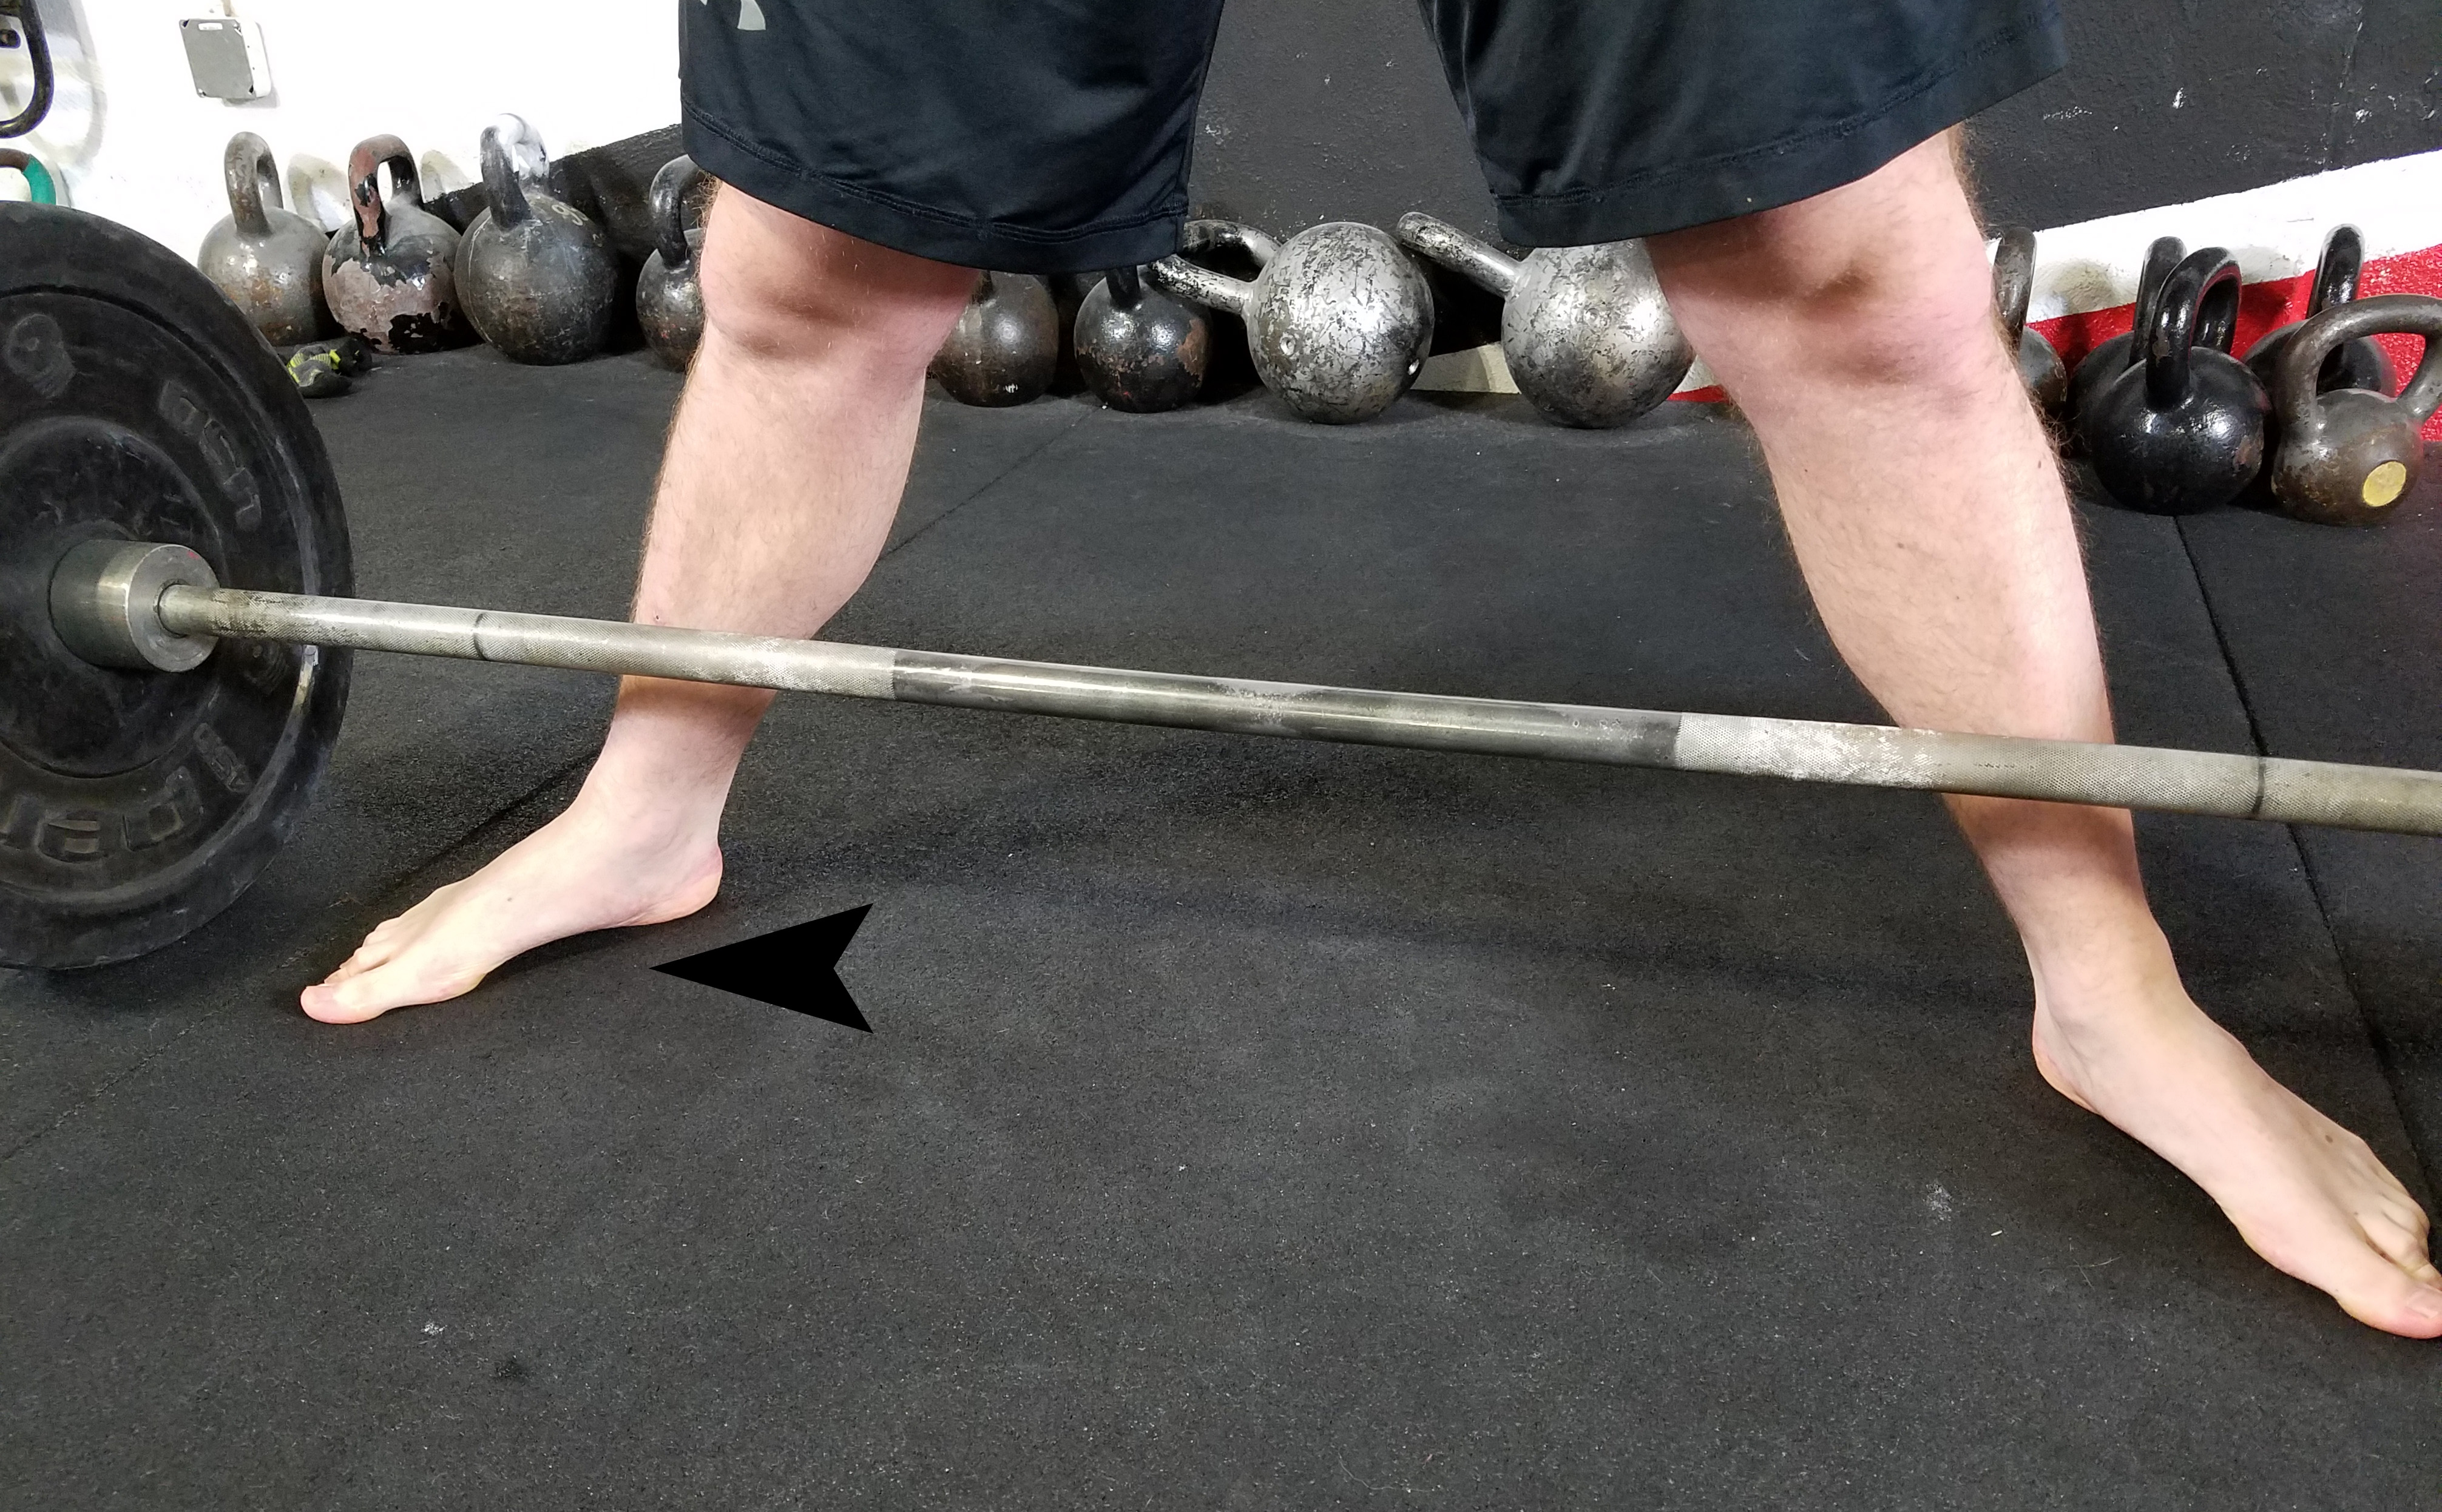 The Sumo Deadlift High Pull  The sumo deadlift high pull builds on the  deadlift but uses a wider stance and a narrower grip. The sumo deadlift  high pull also adds velocity